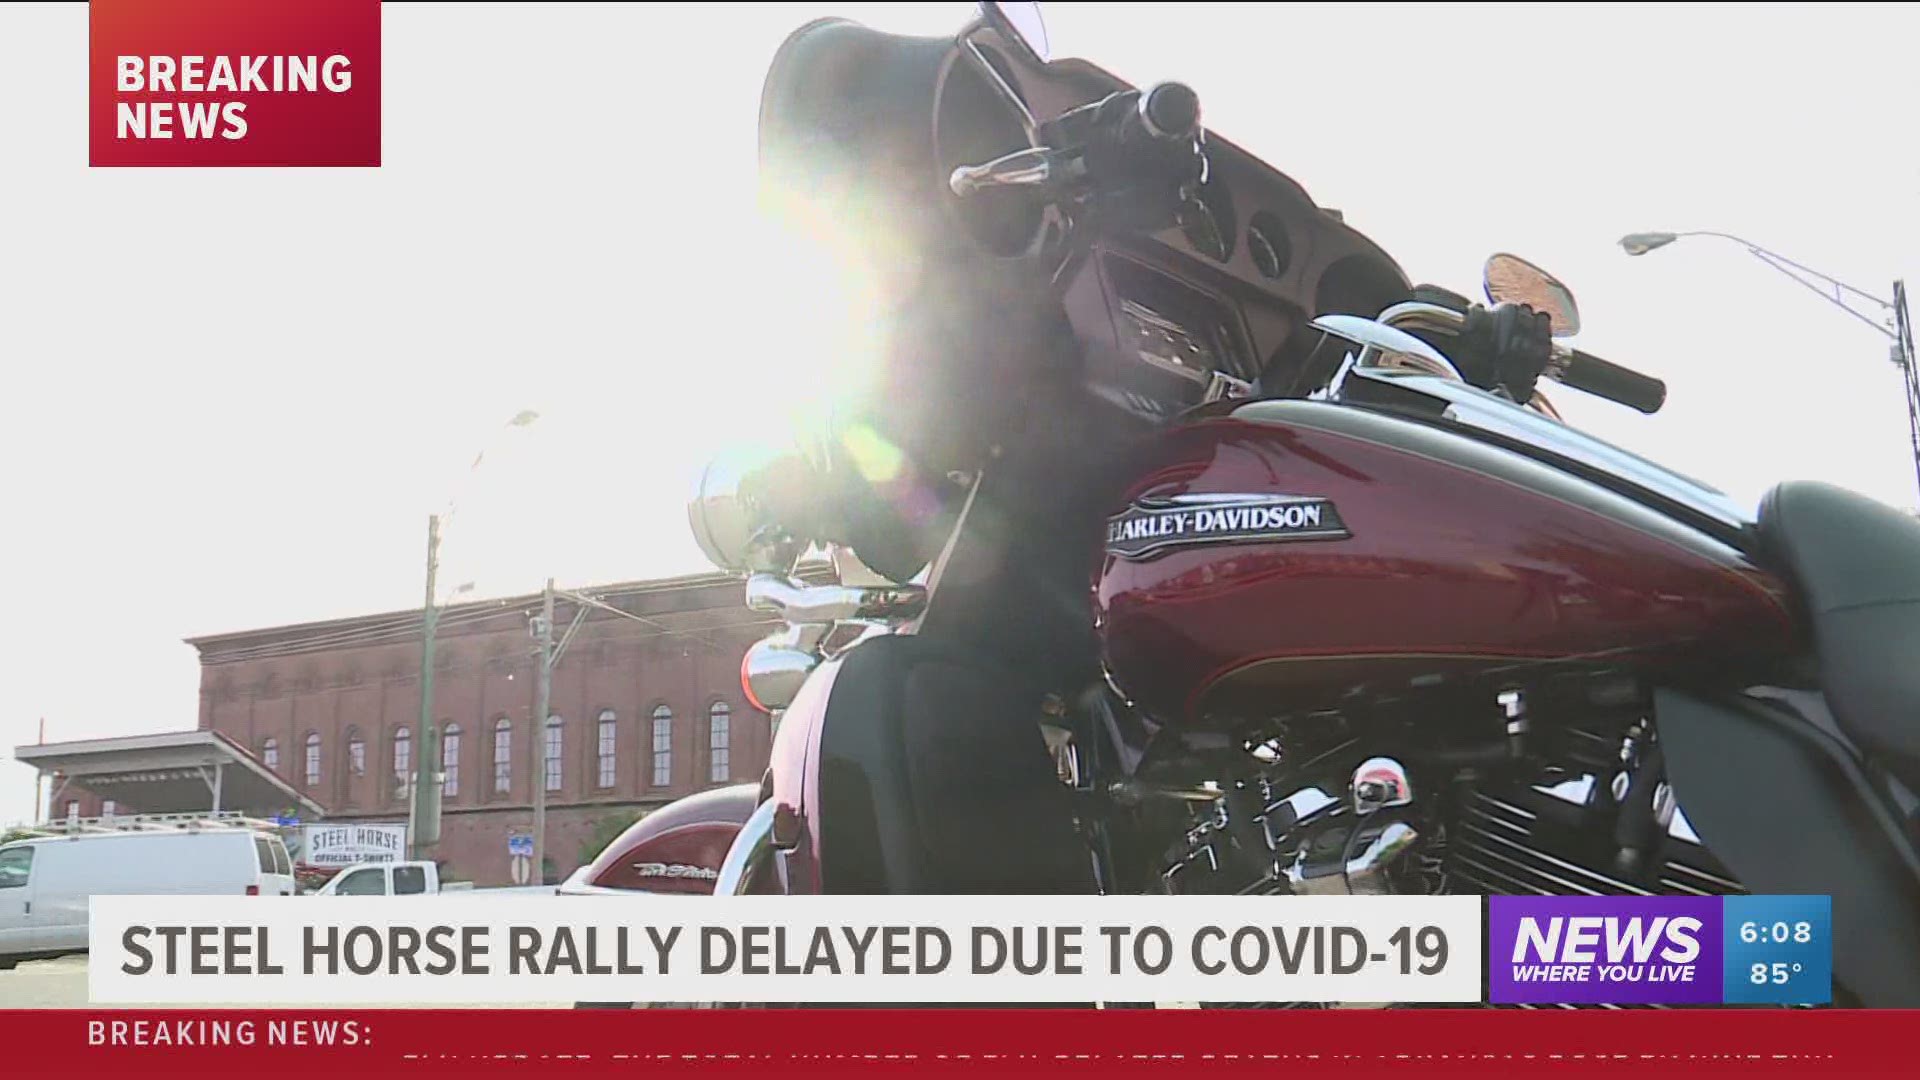 Steel Horse Rally delayed due to COVID-19